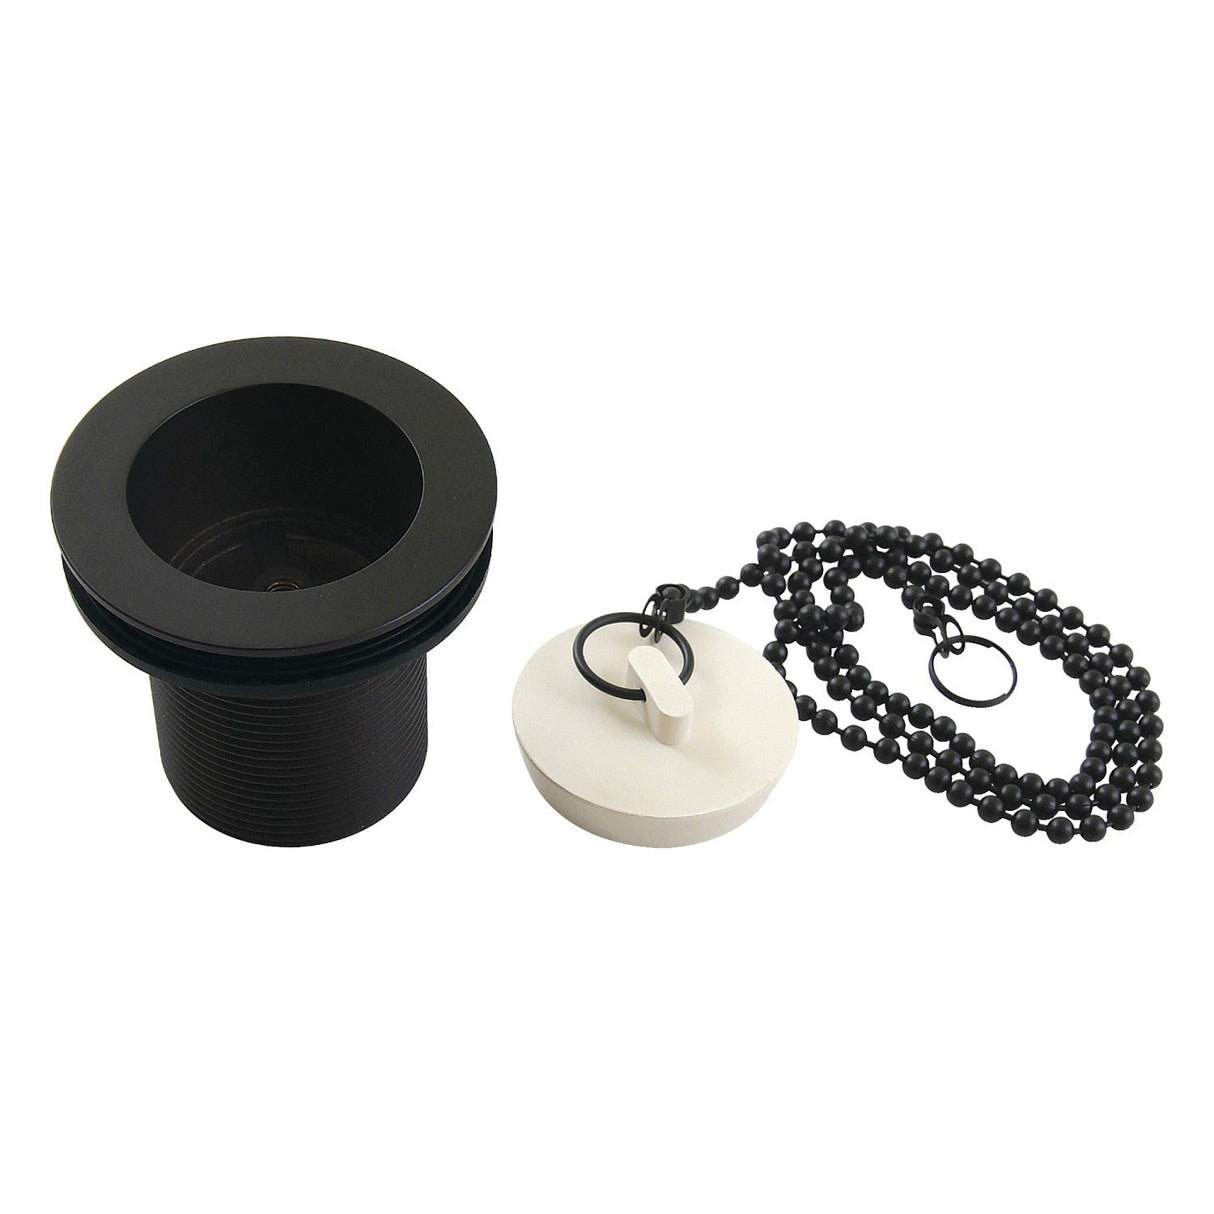 Made To Match DSP20MB 1-1/2-Inch Chain and Stopper Tub Drain with 2-Inch Body Thread, Matte Black